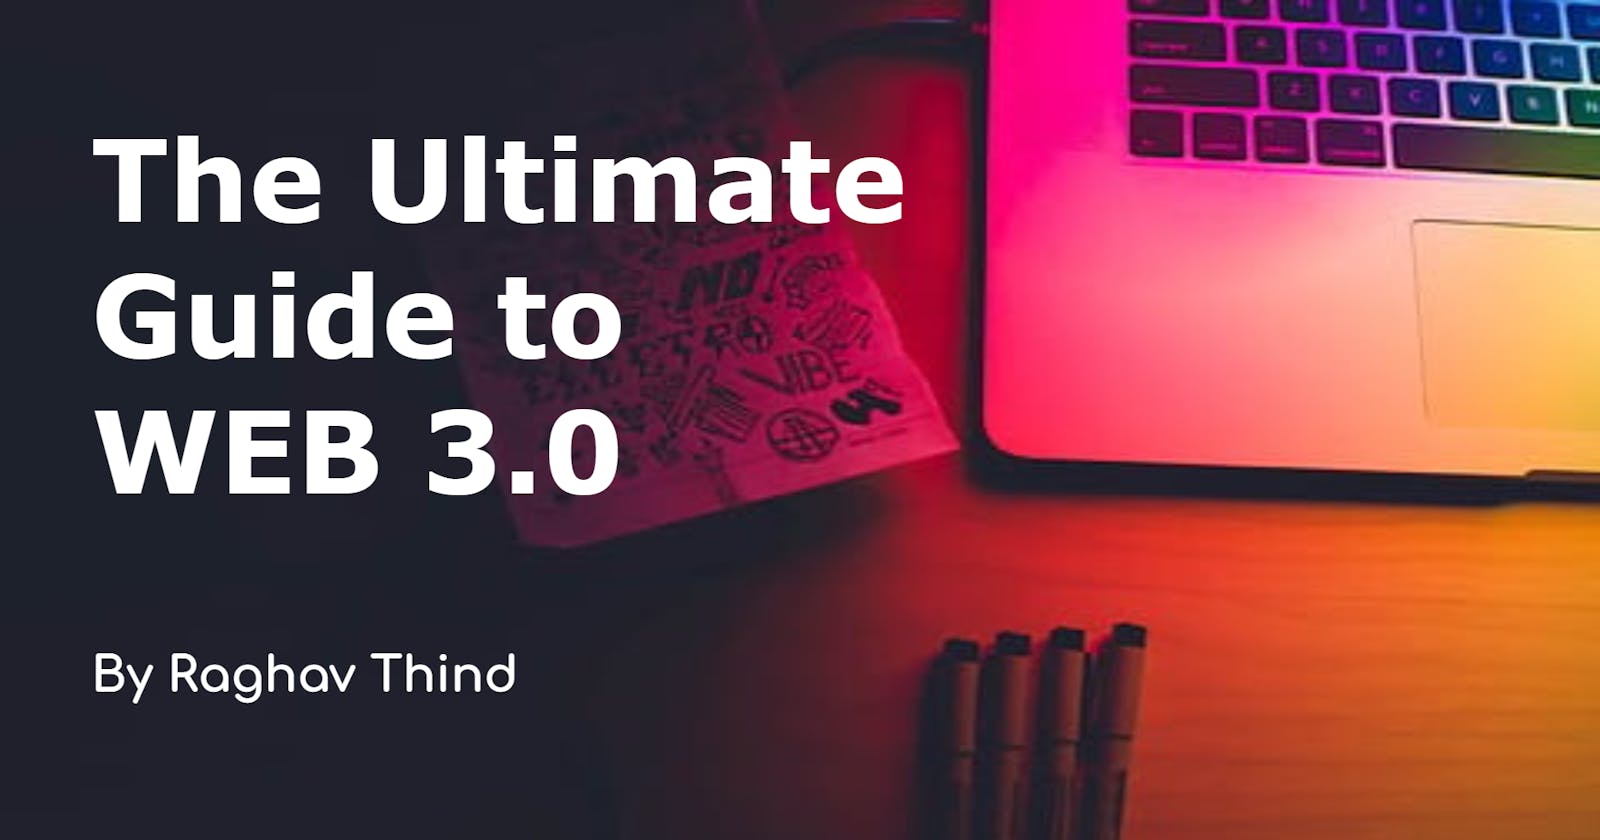 The Ultimate Guide to Web 3.0